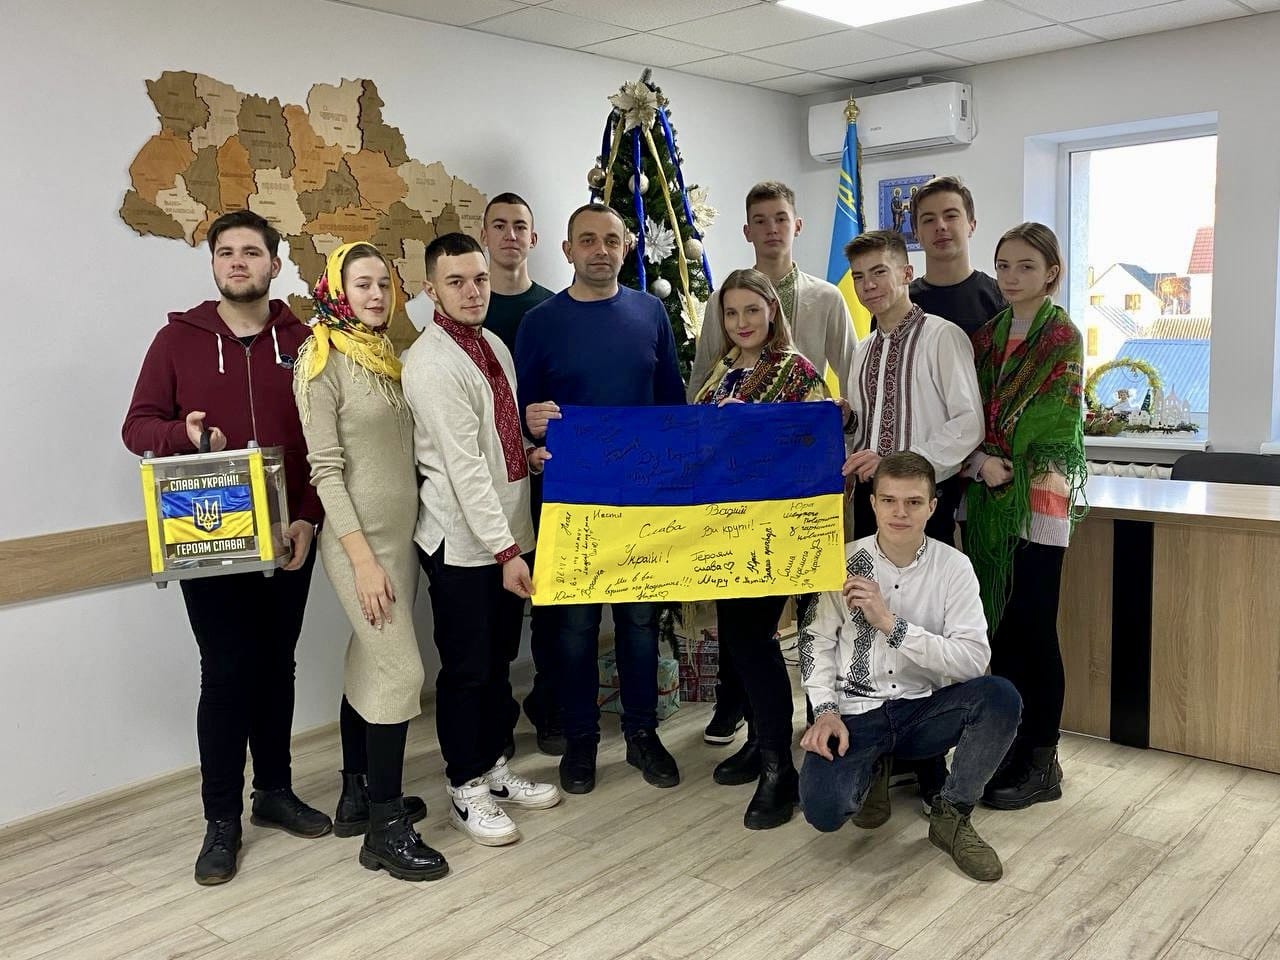 Petro Sokolovskyi with the youth who organized a Christmas nativity scene in support of the Armed Forces of Ukraine